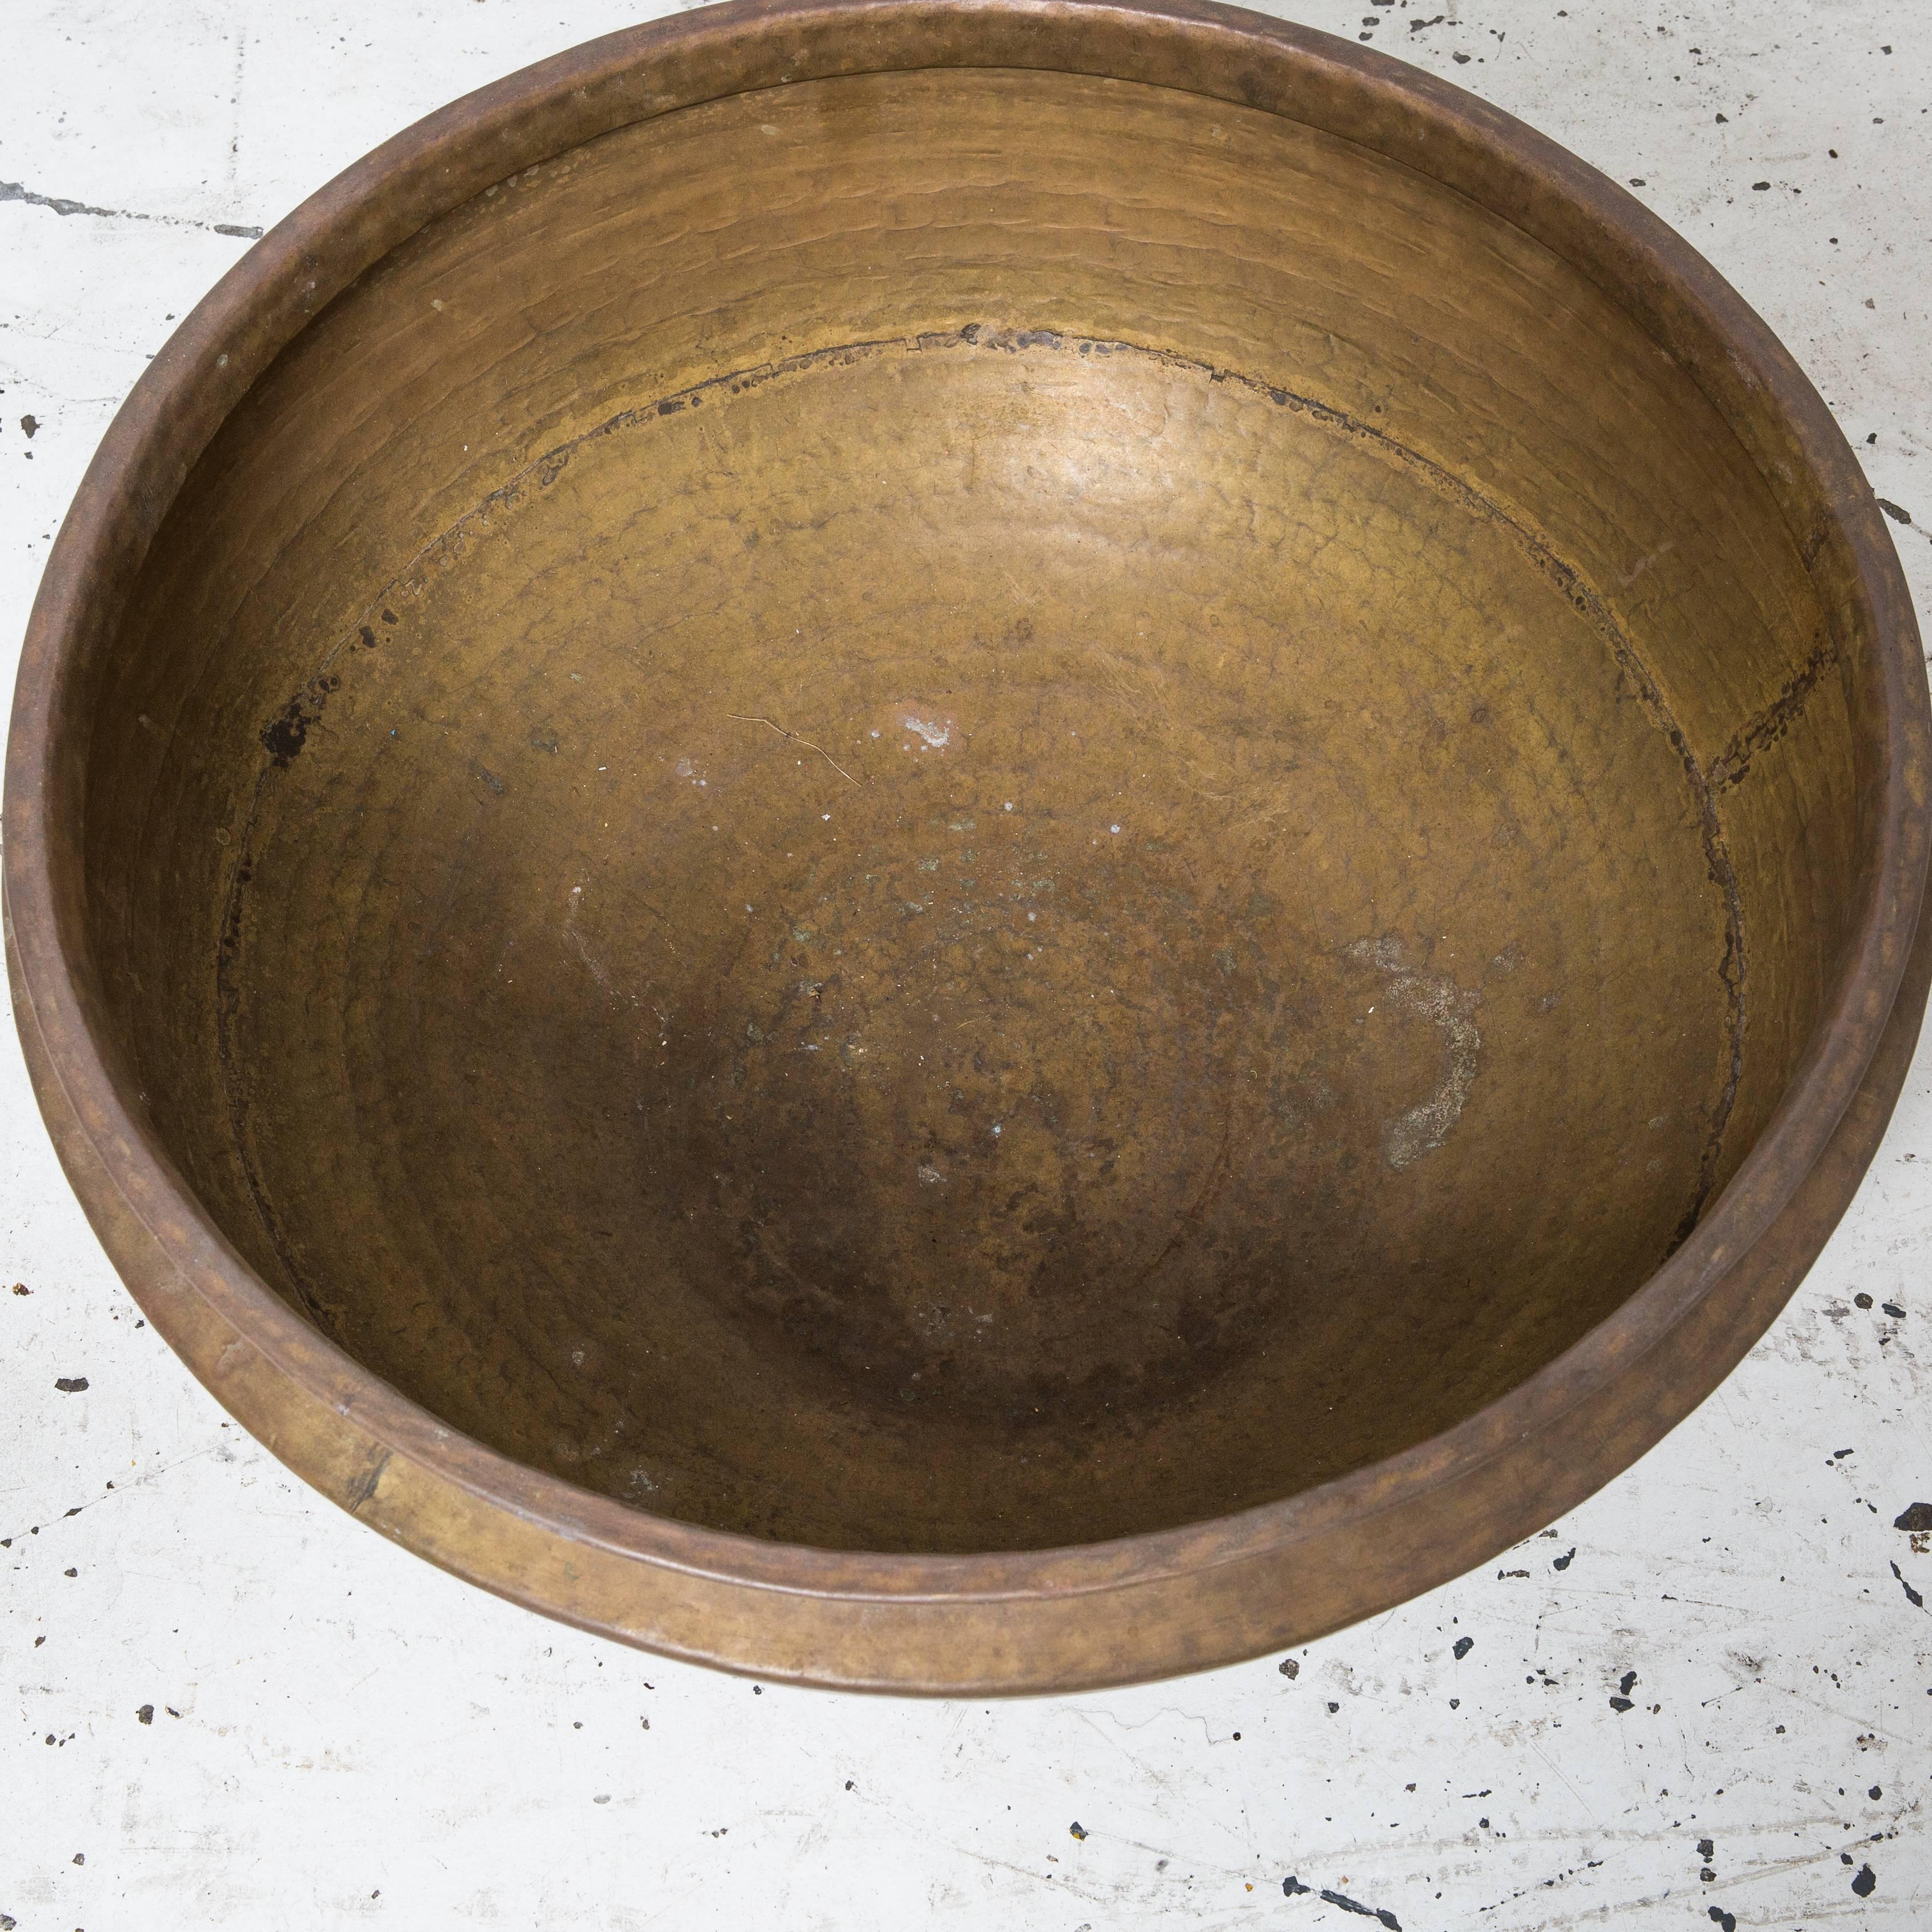 Large sized solid brass Indian pot traditionally used for cooking. Would make a great flower pot or outdoor fire pit.